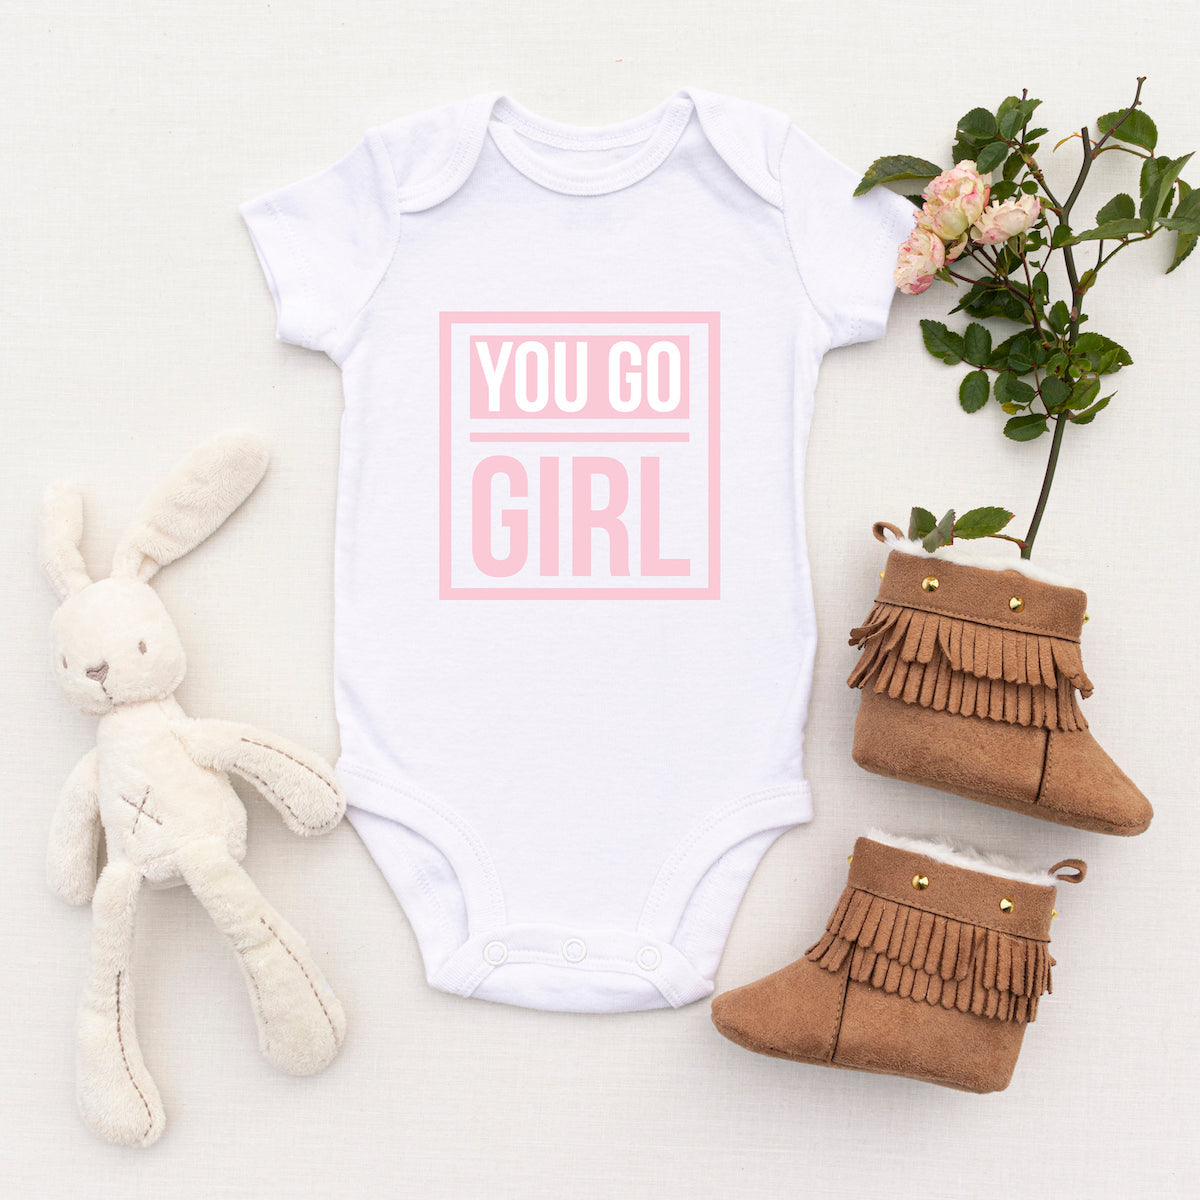 Personalised White Baby Body Suit Grow Vest - Go Girl